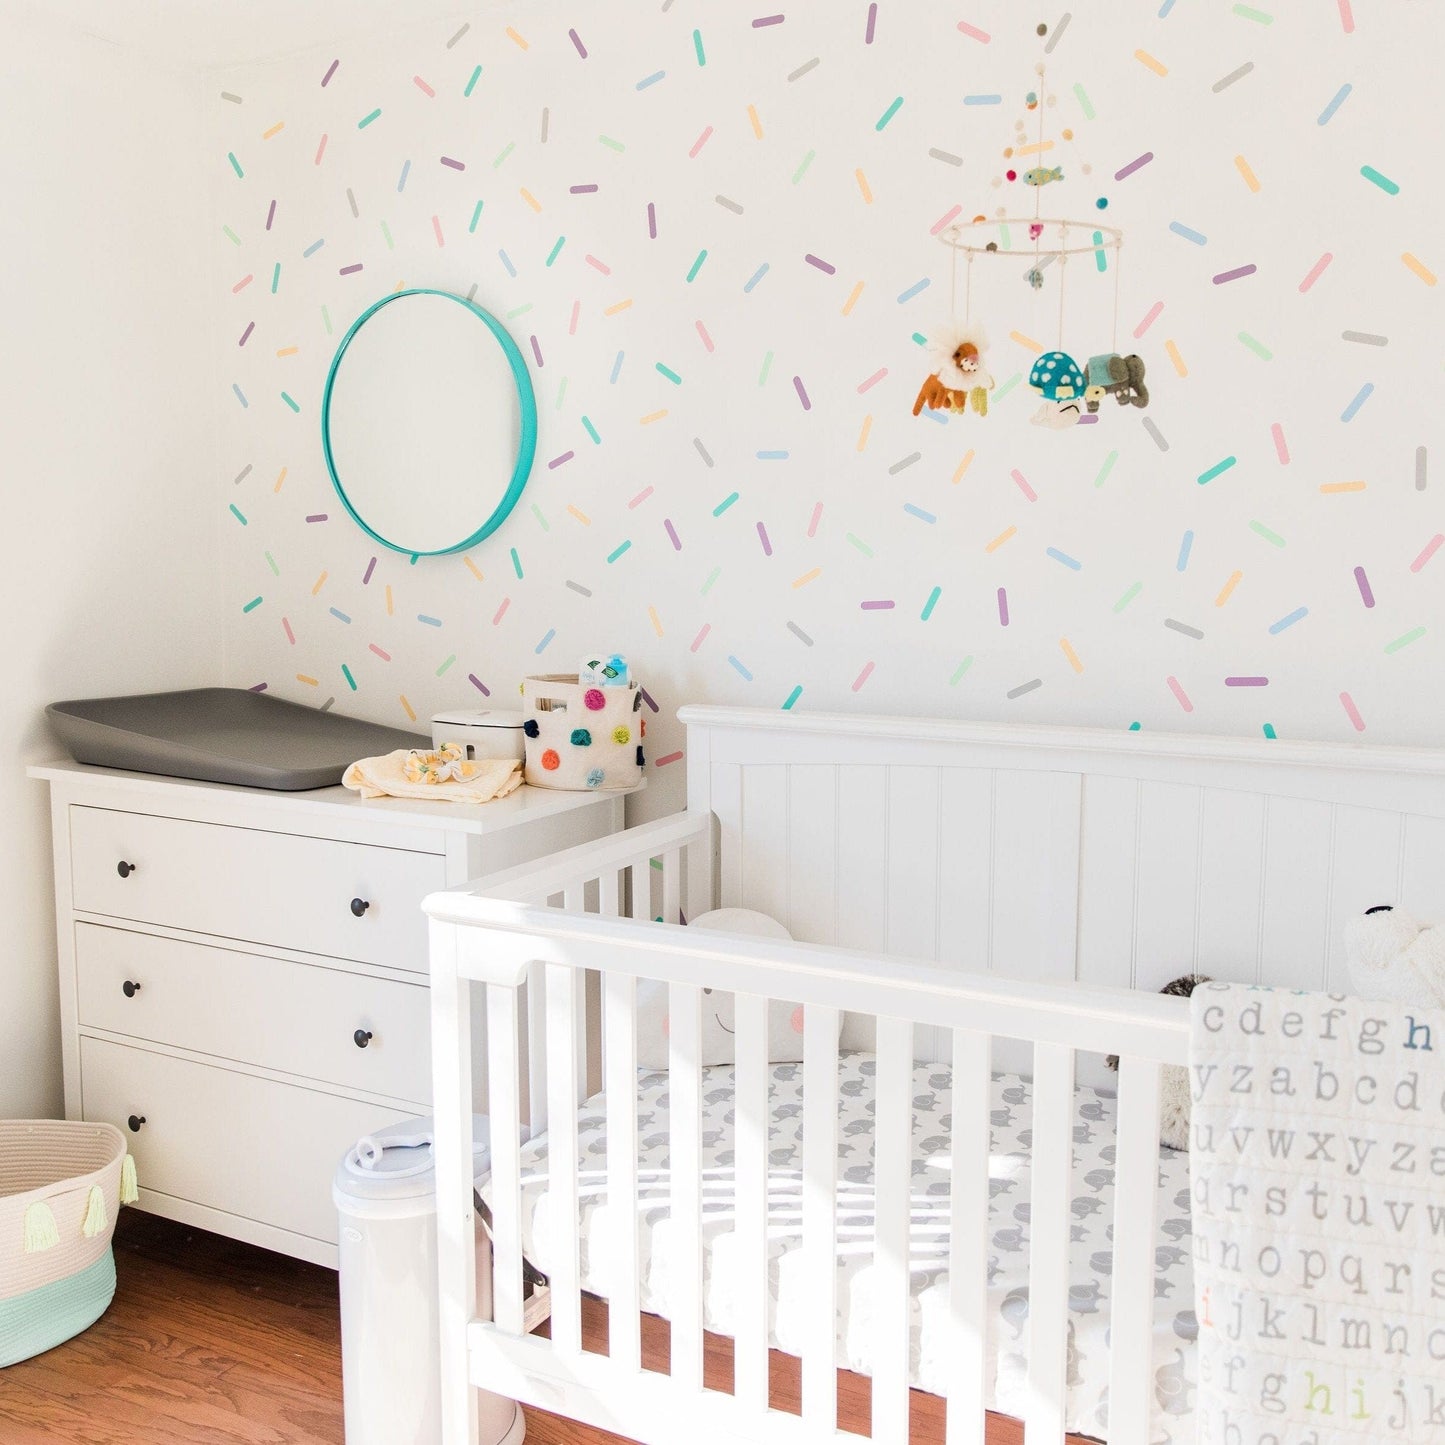 confetti-sprinkle-wall-decals_kids-pattern-decals